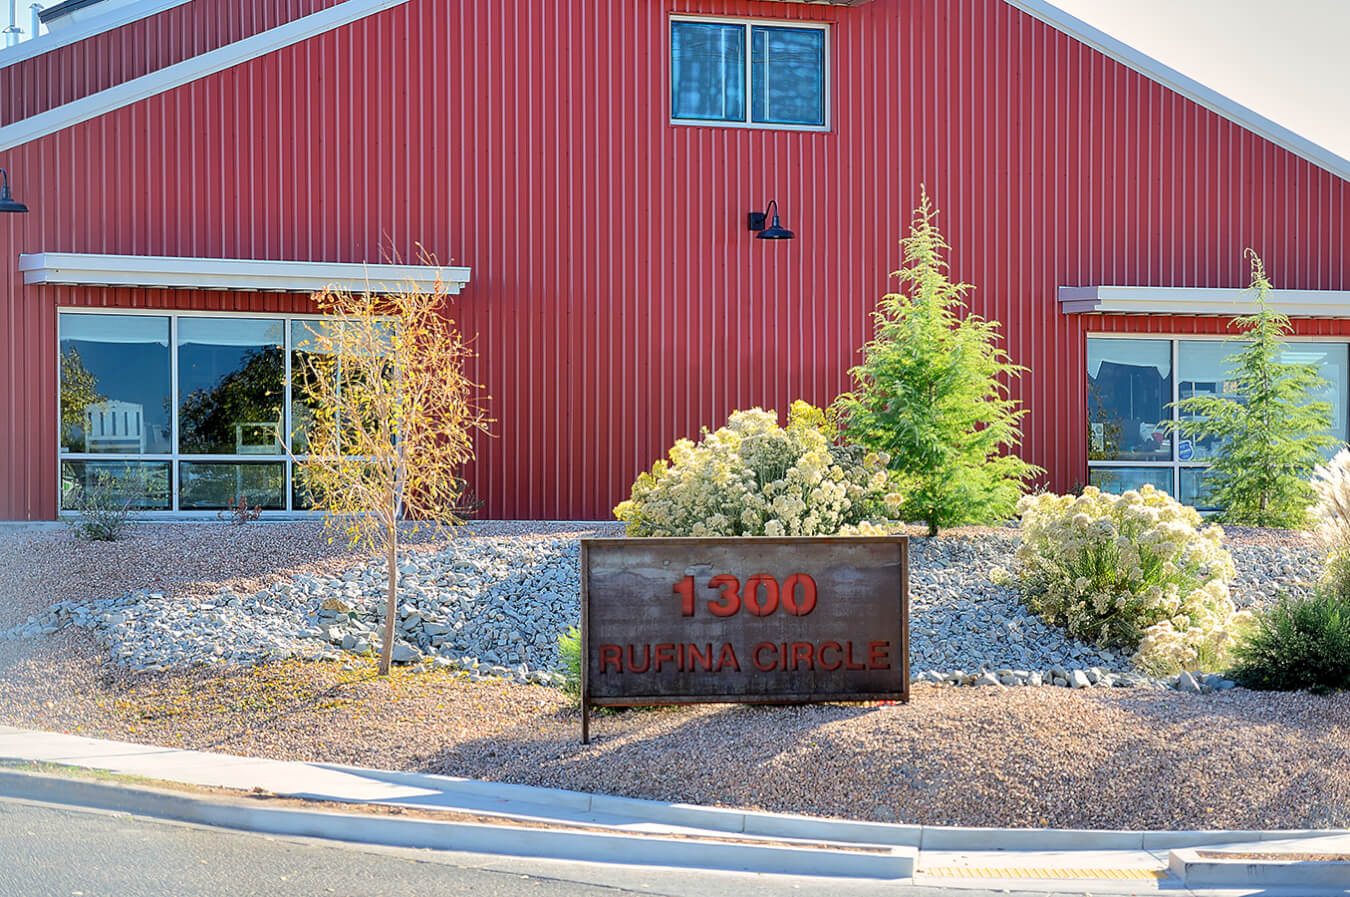          Description: A red building in Santa Fe with a sign on it.